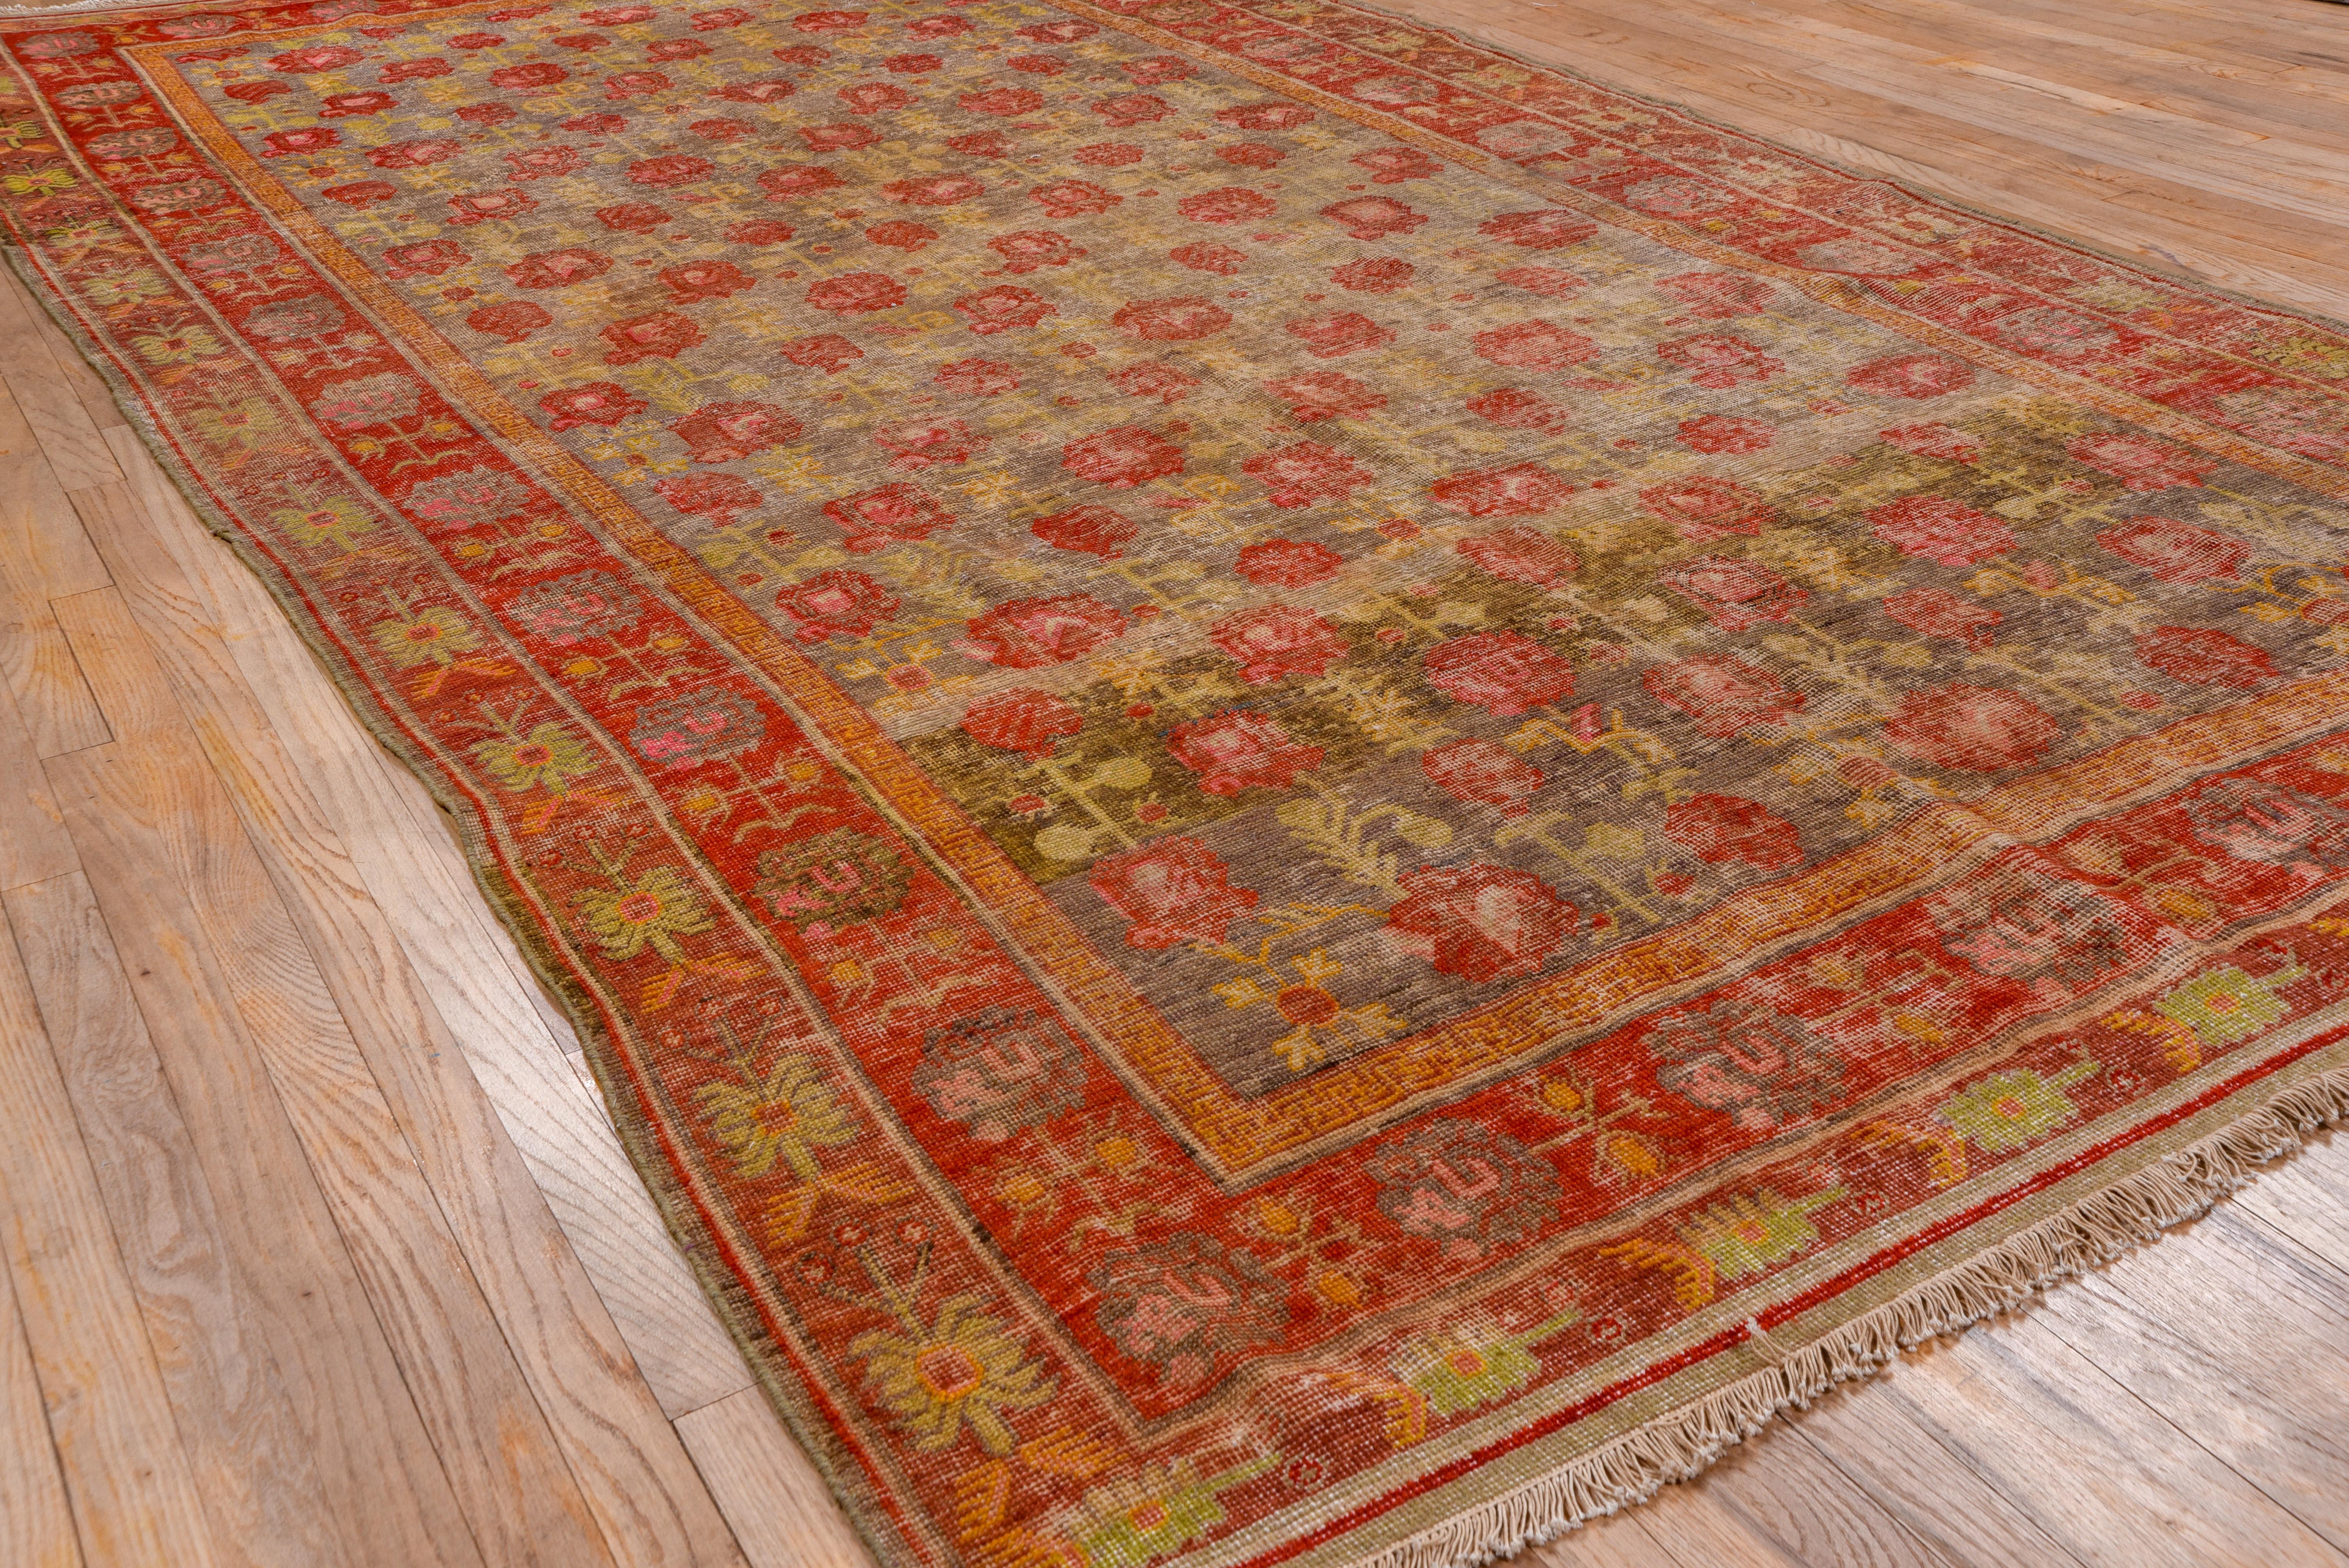 
Antique Khotan rugs are exquisite handwoven textiles originating from the ancient city of Khotan, located along the famous Silk Road in what is now the Xinjiang region of western China. These rugs have a rich history dating back centuries and are